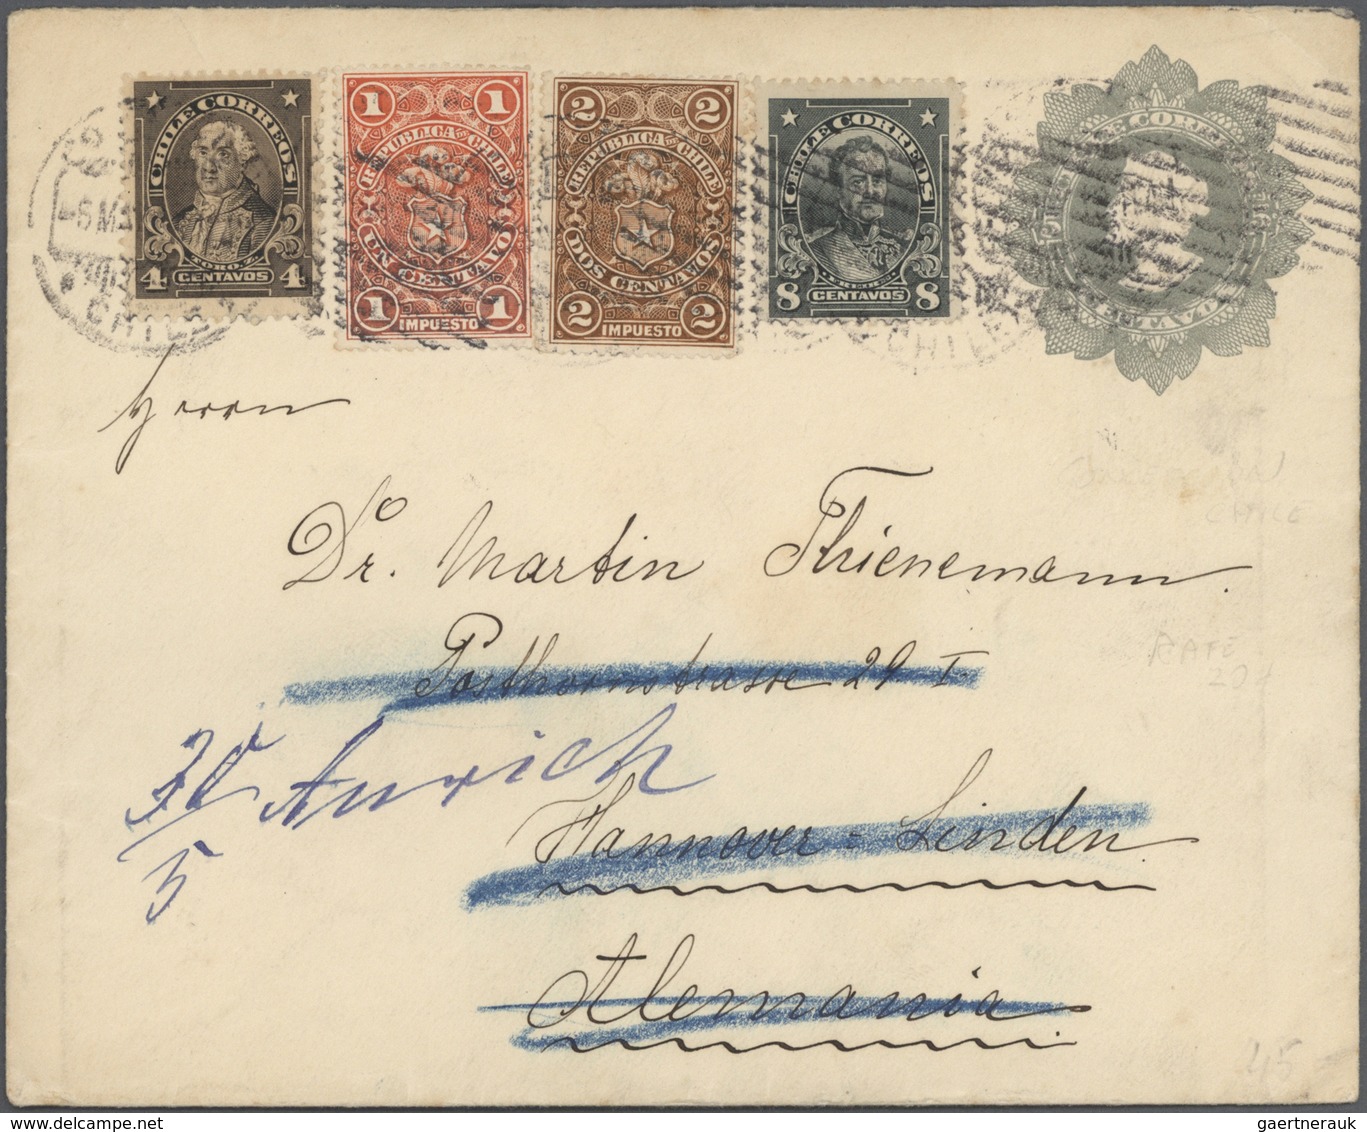 Br/GA Chile: 1891/1913, FISCALS POSTALLY USED, collection of 34 covers/stationeries bearing fiscals stamps